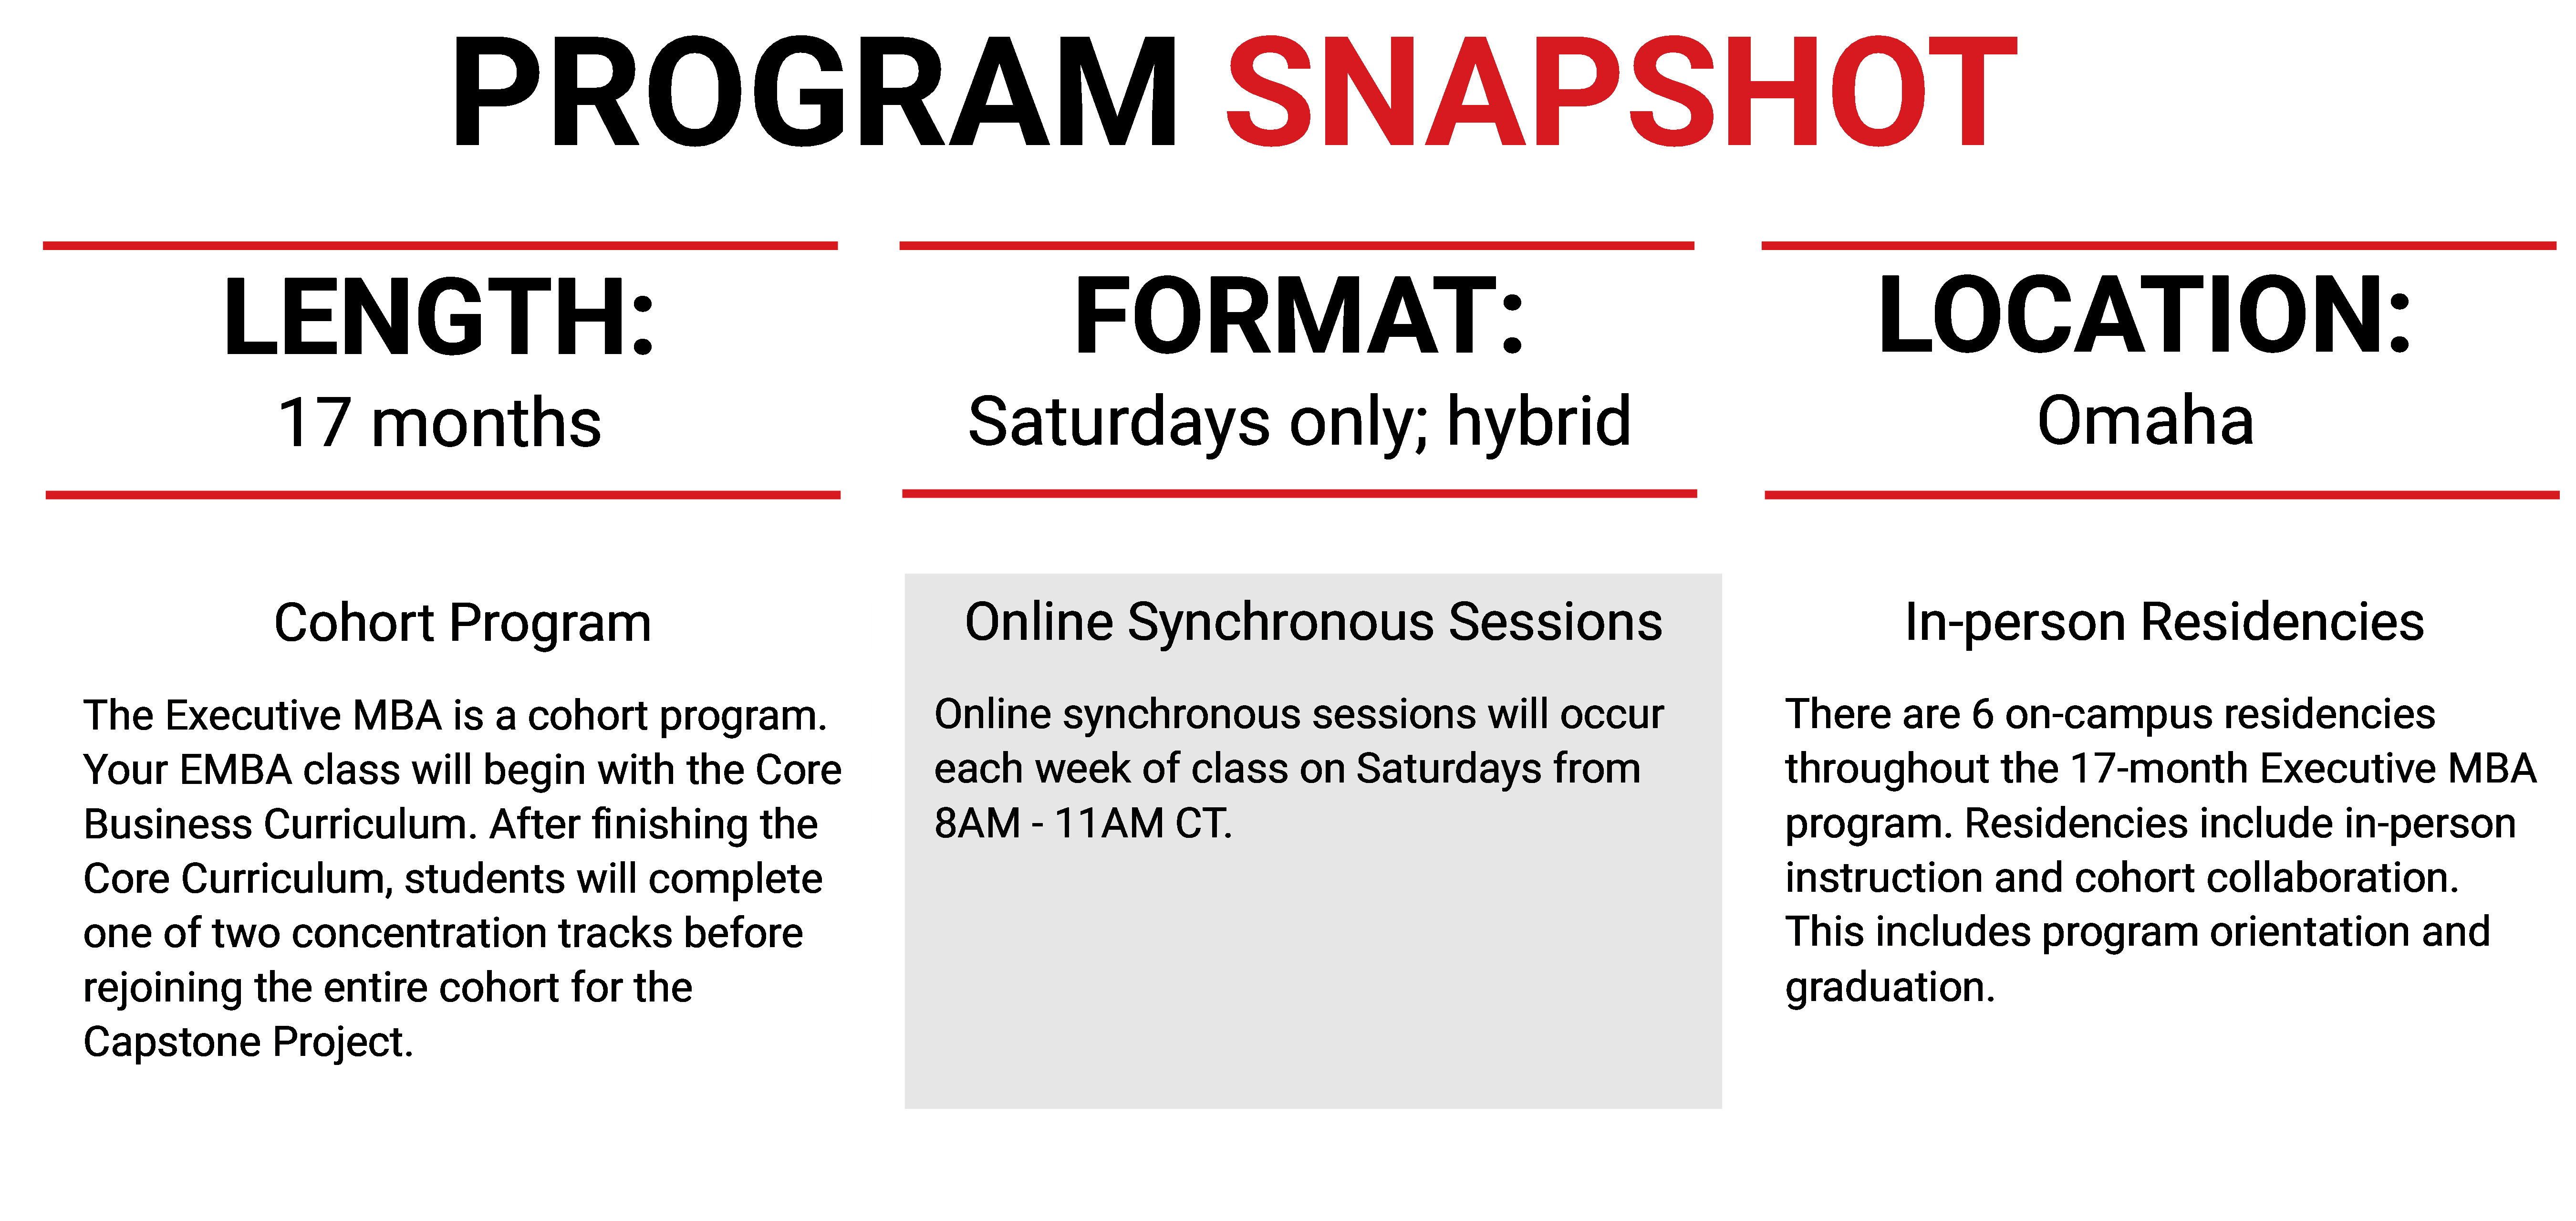 hybrid 17 month cohort program, online synchronous format, 6 on-campus residencies, class held on Saturdays from 8am to 11am